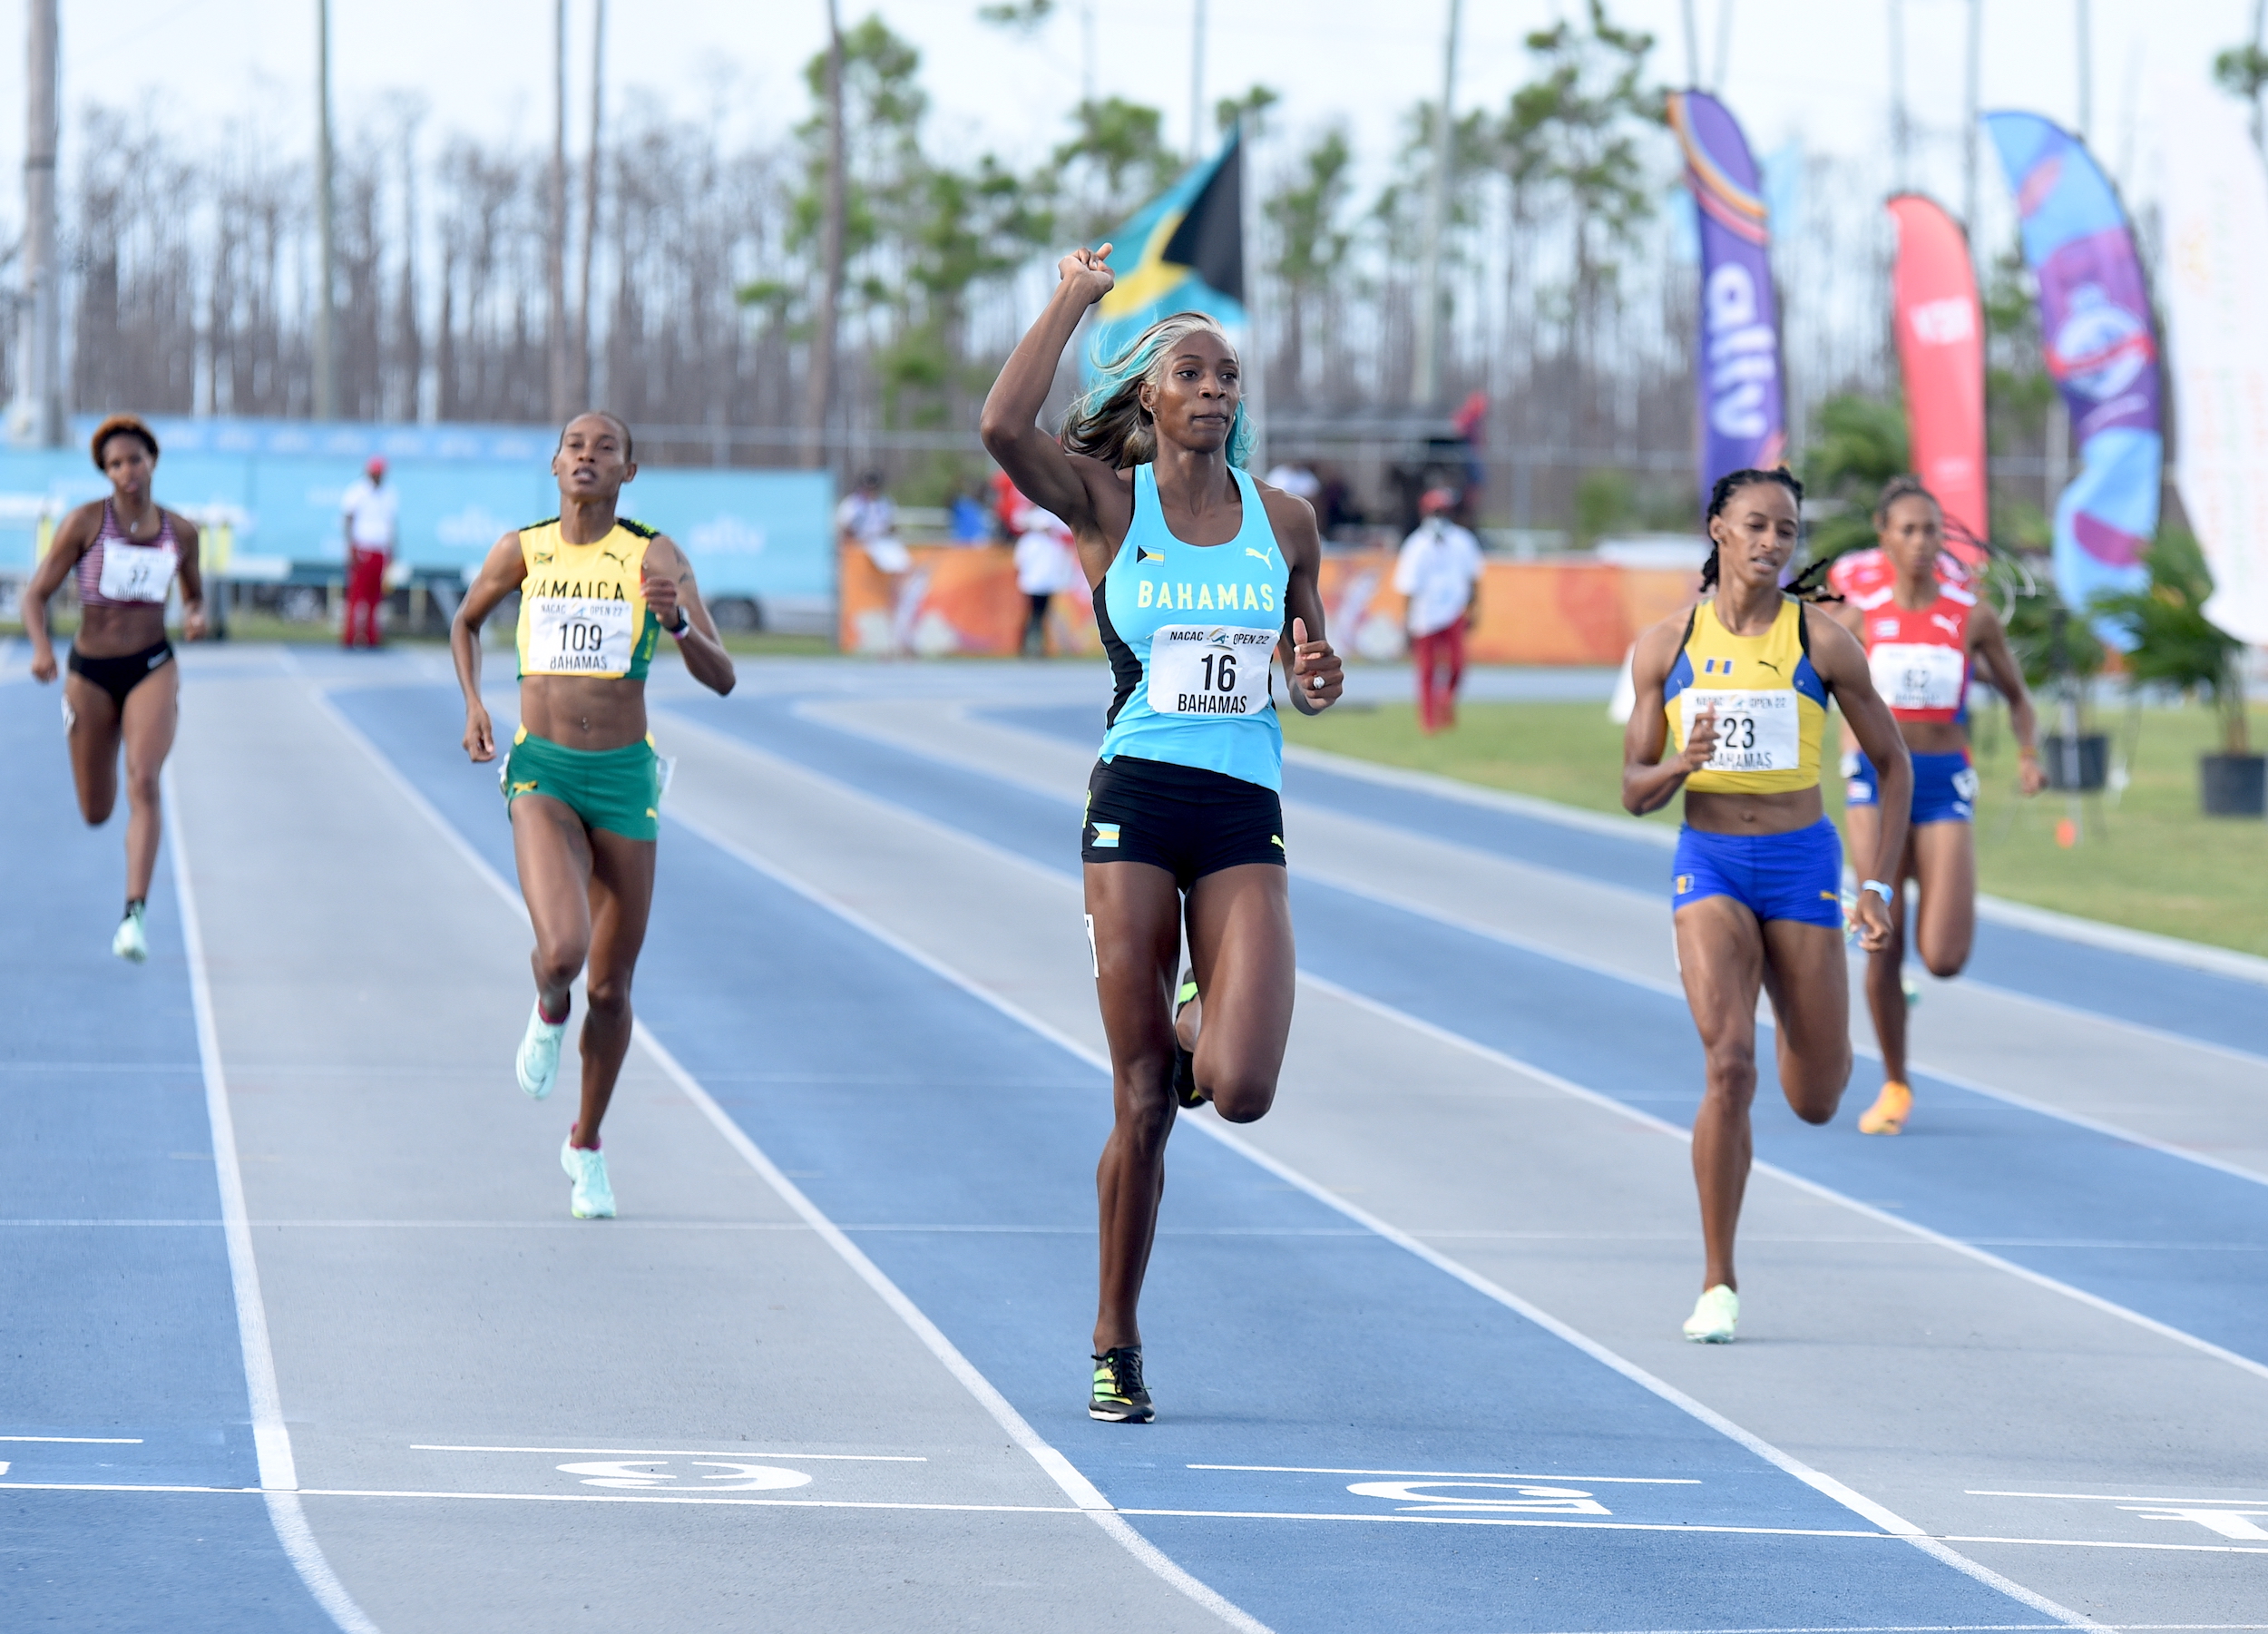 Shaunae Miller-Uibo celebrates as she crosses the line to win the women's 400m final in 49.40 at the NACAC Open Championships in Freeport, Grand Bahamas.